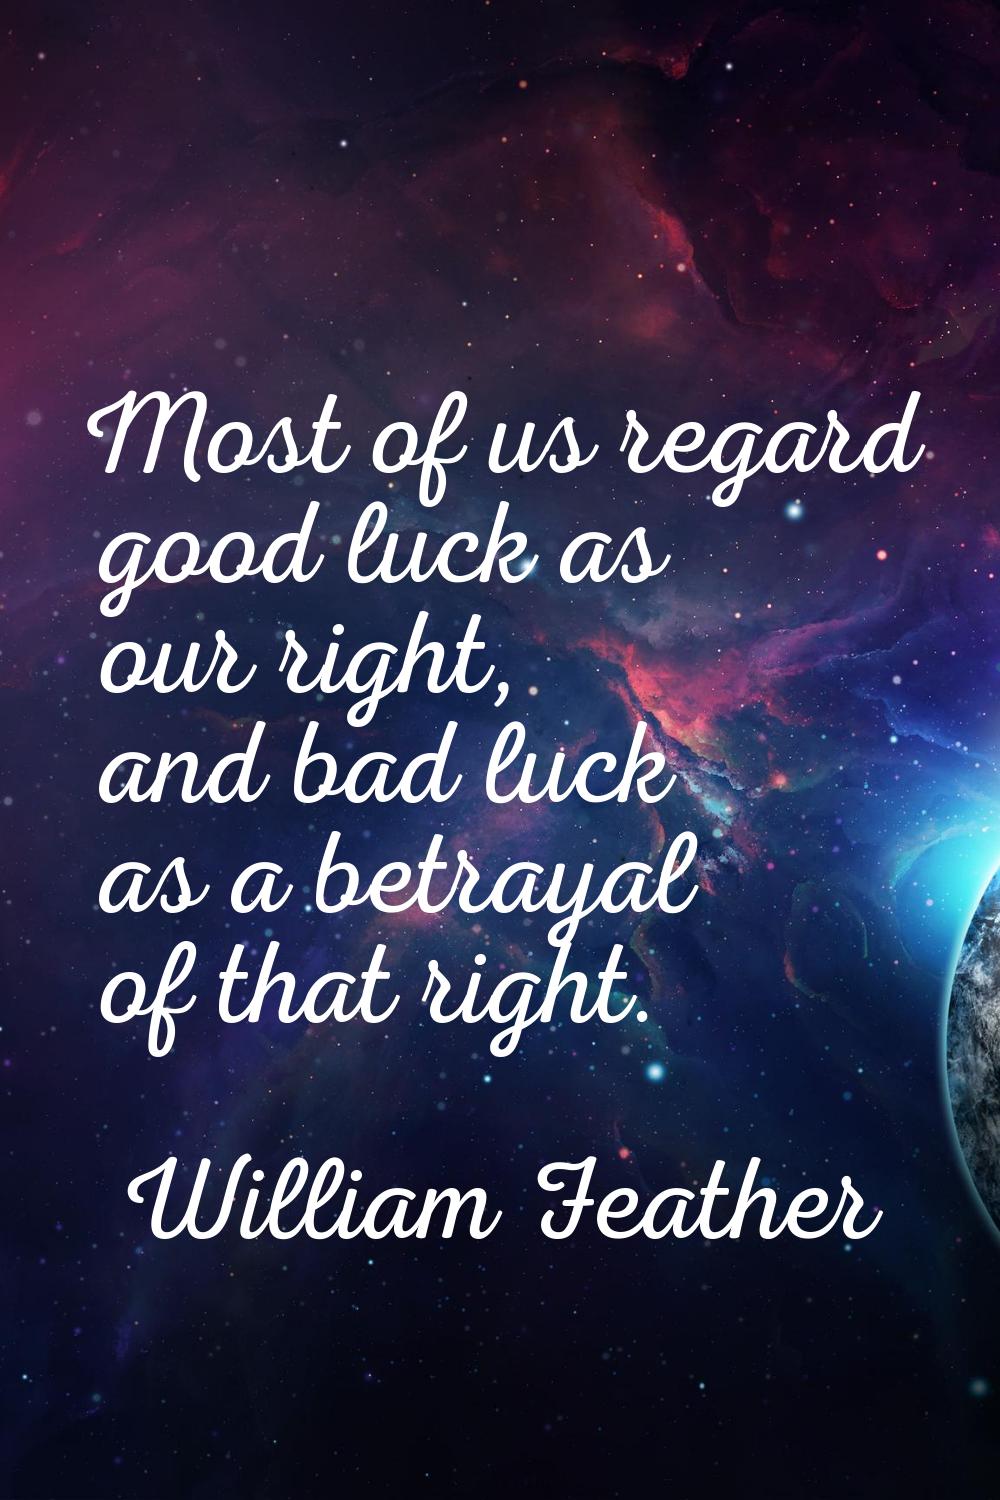 Most of us regard good luck as our right, and bad luck as a betrayal of that right.